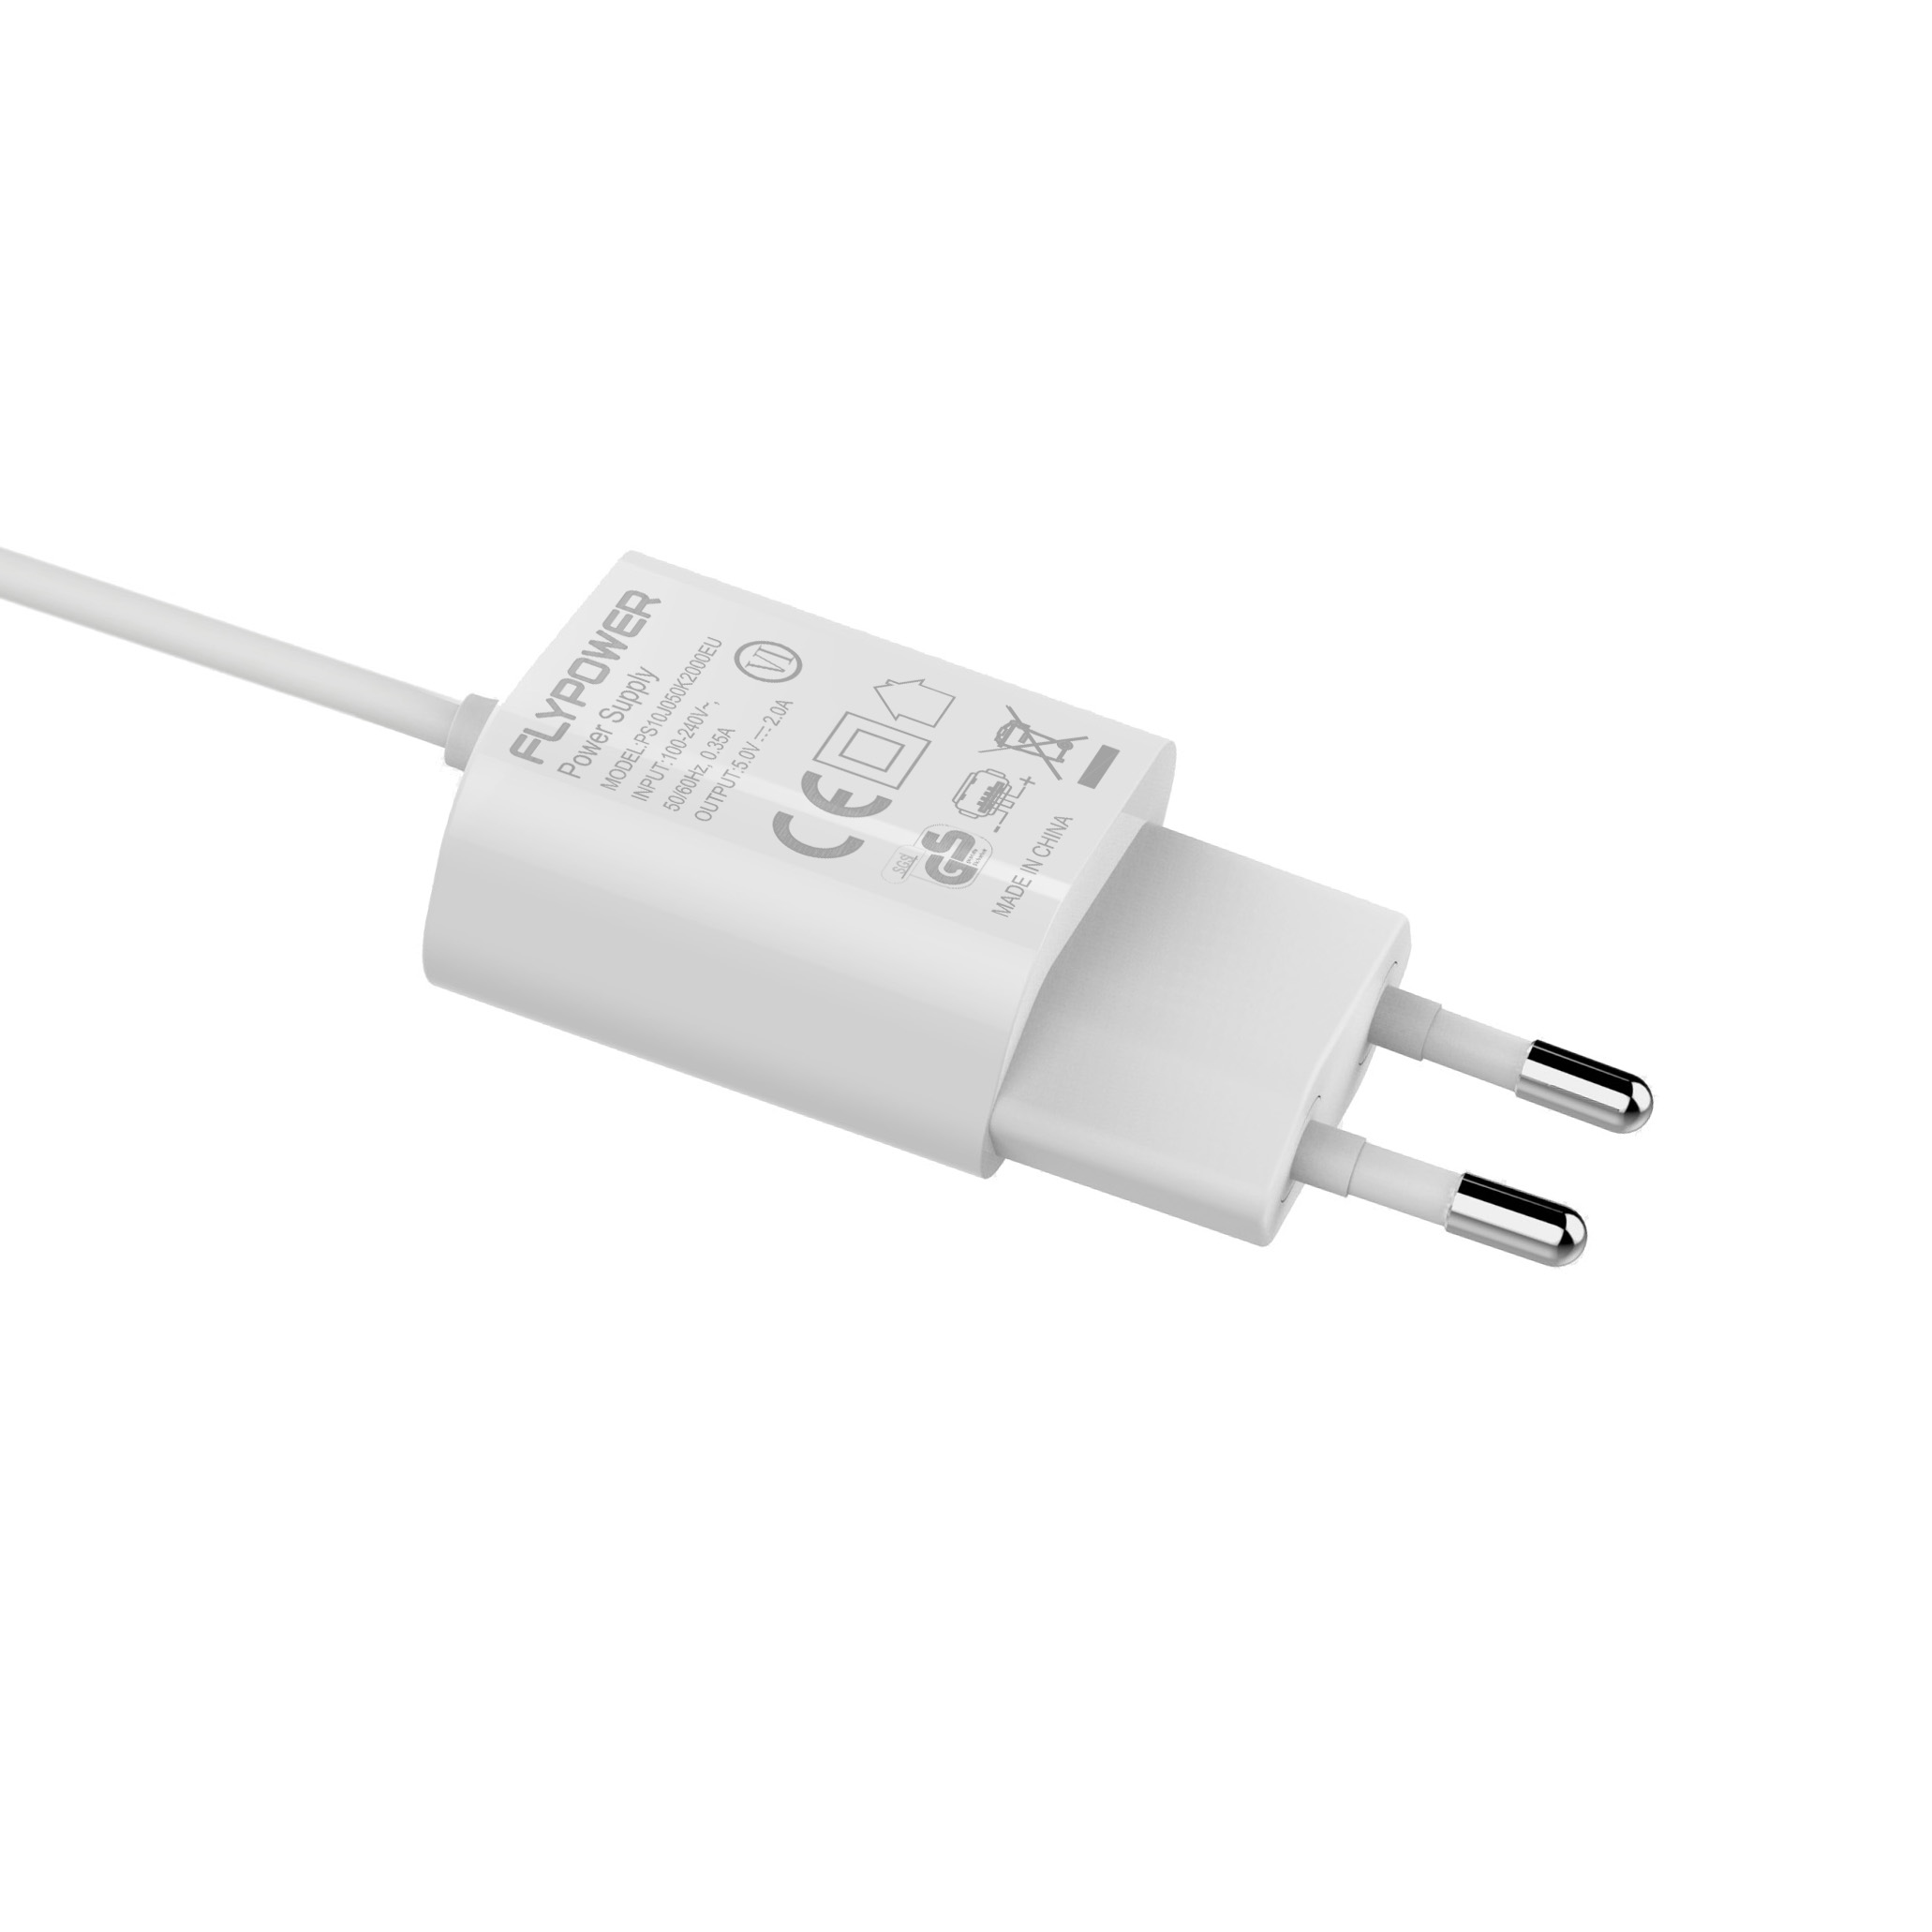 5V2.1A CE power adapter(with line) white